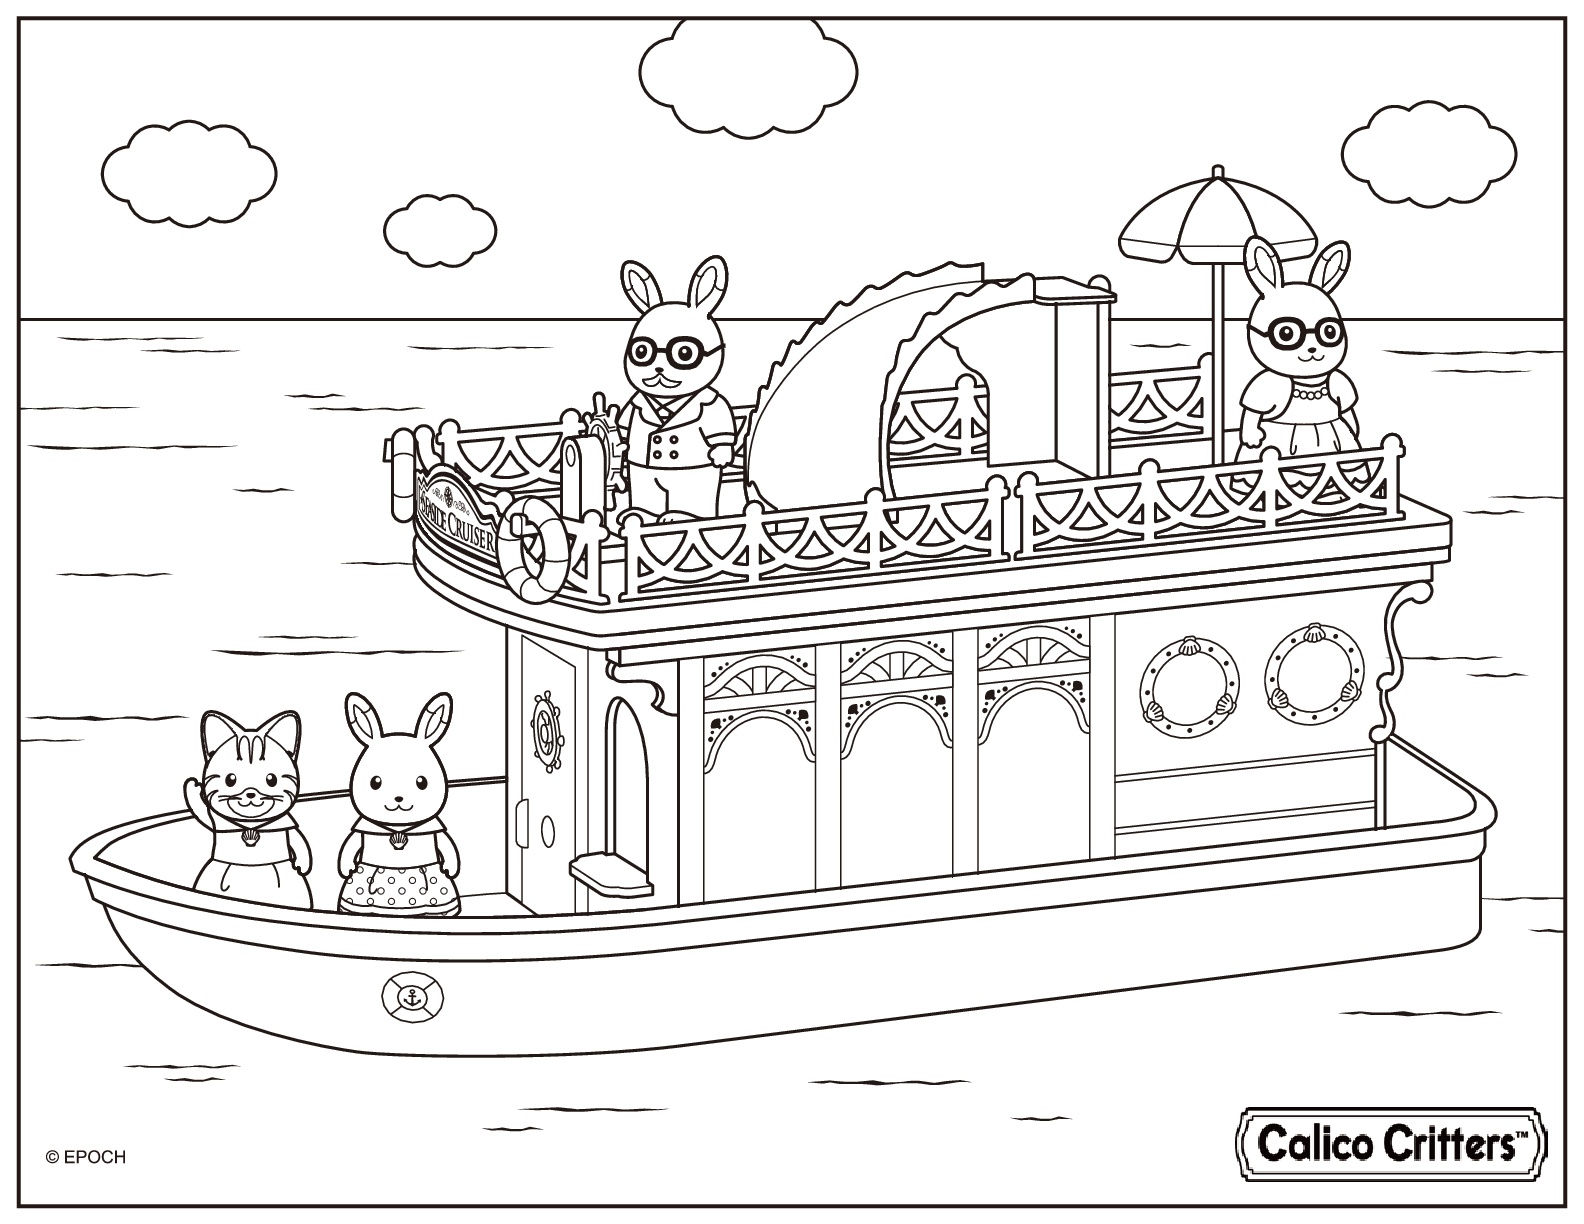 Calico Critters Having Fun On The Boat